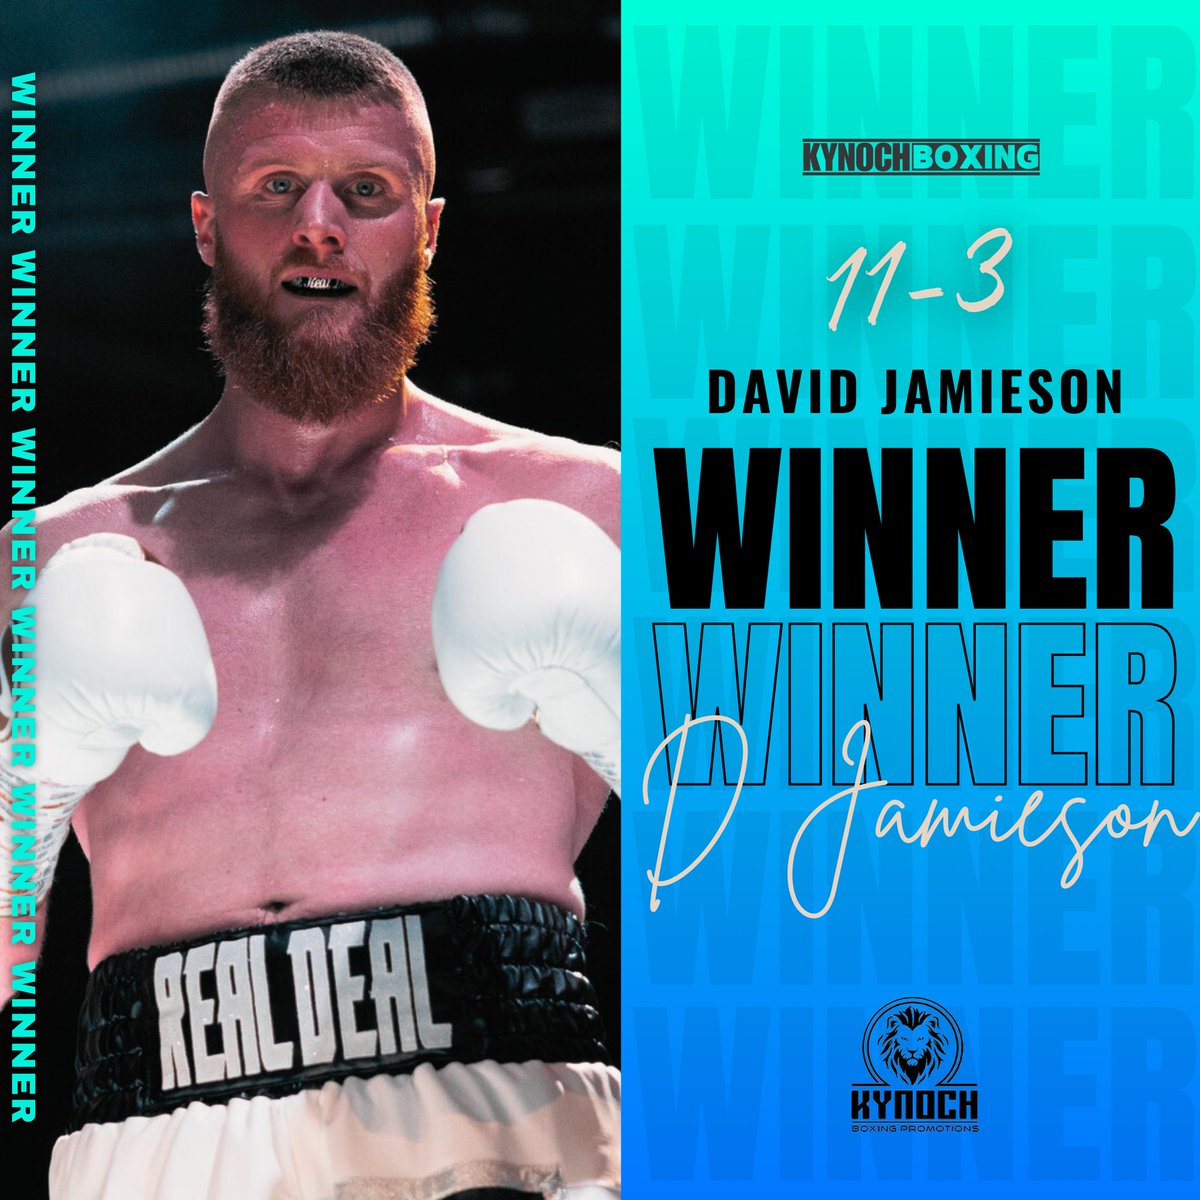 Real Deal in One 👀

David Jamieson returns with a vicious 1st round TKO victory over Kaseem Saleem.💥

Heavy shots from the Cruiserweight and Kaseem showed great heart to get up from the 1st knockdown.

#Boxing #fightnight